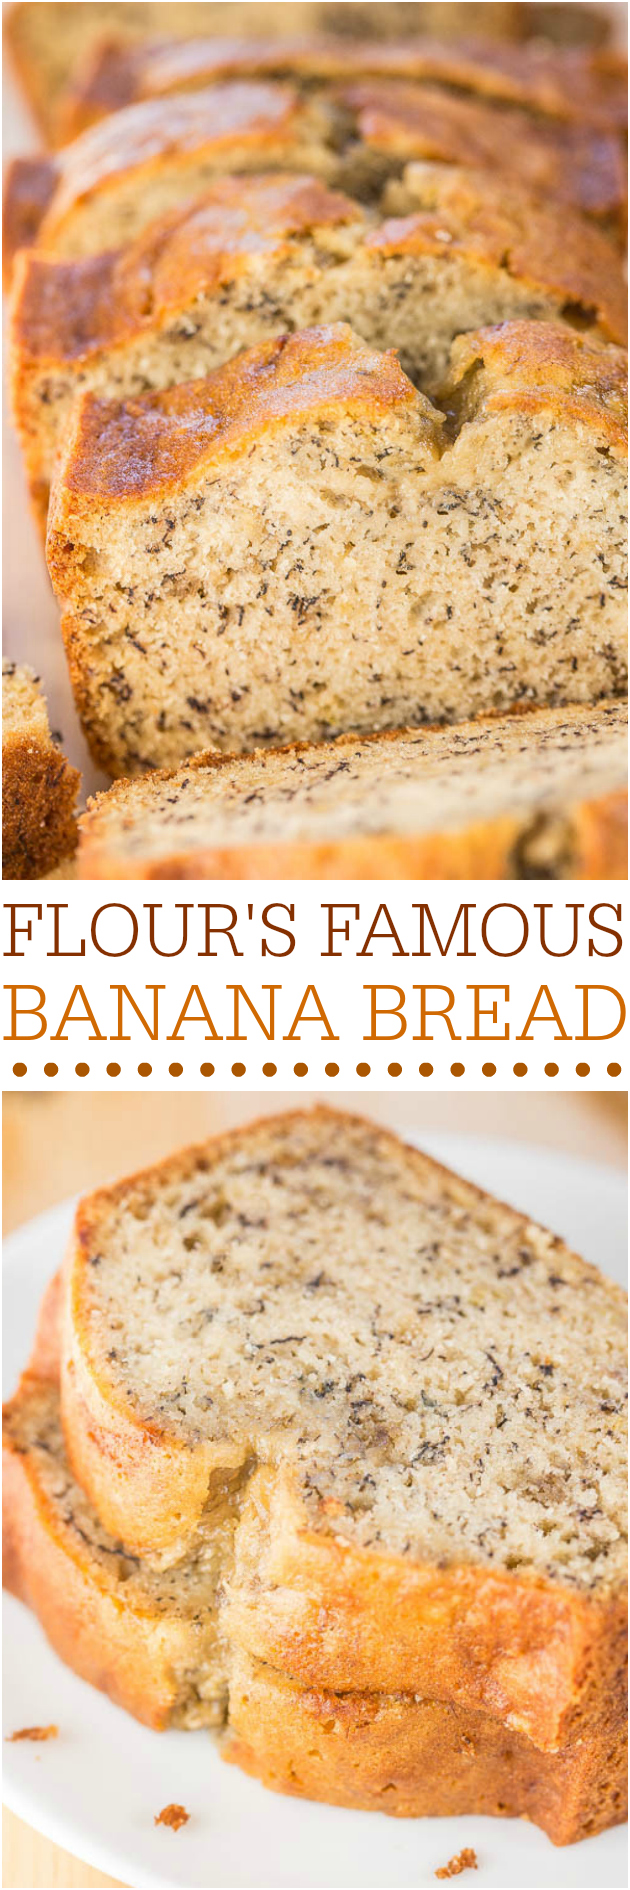 Flour's Famous Banana Bread - Made with Flour Bakery's famous recipe to see if it lives up to the hype. Verdict? Totally fabulous! Make it!!